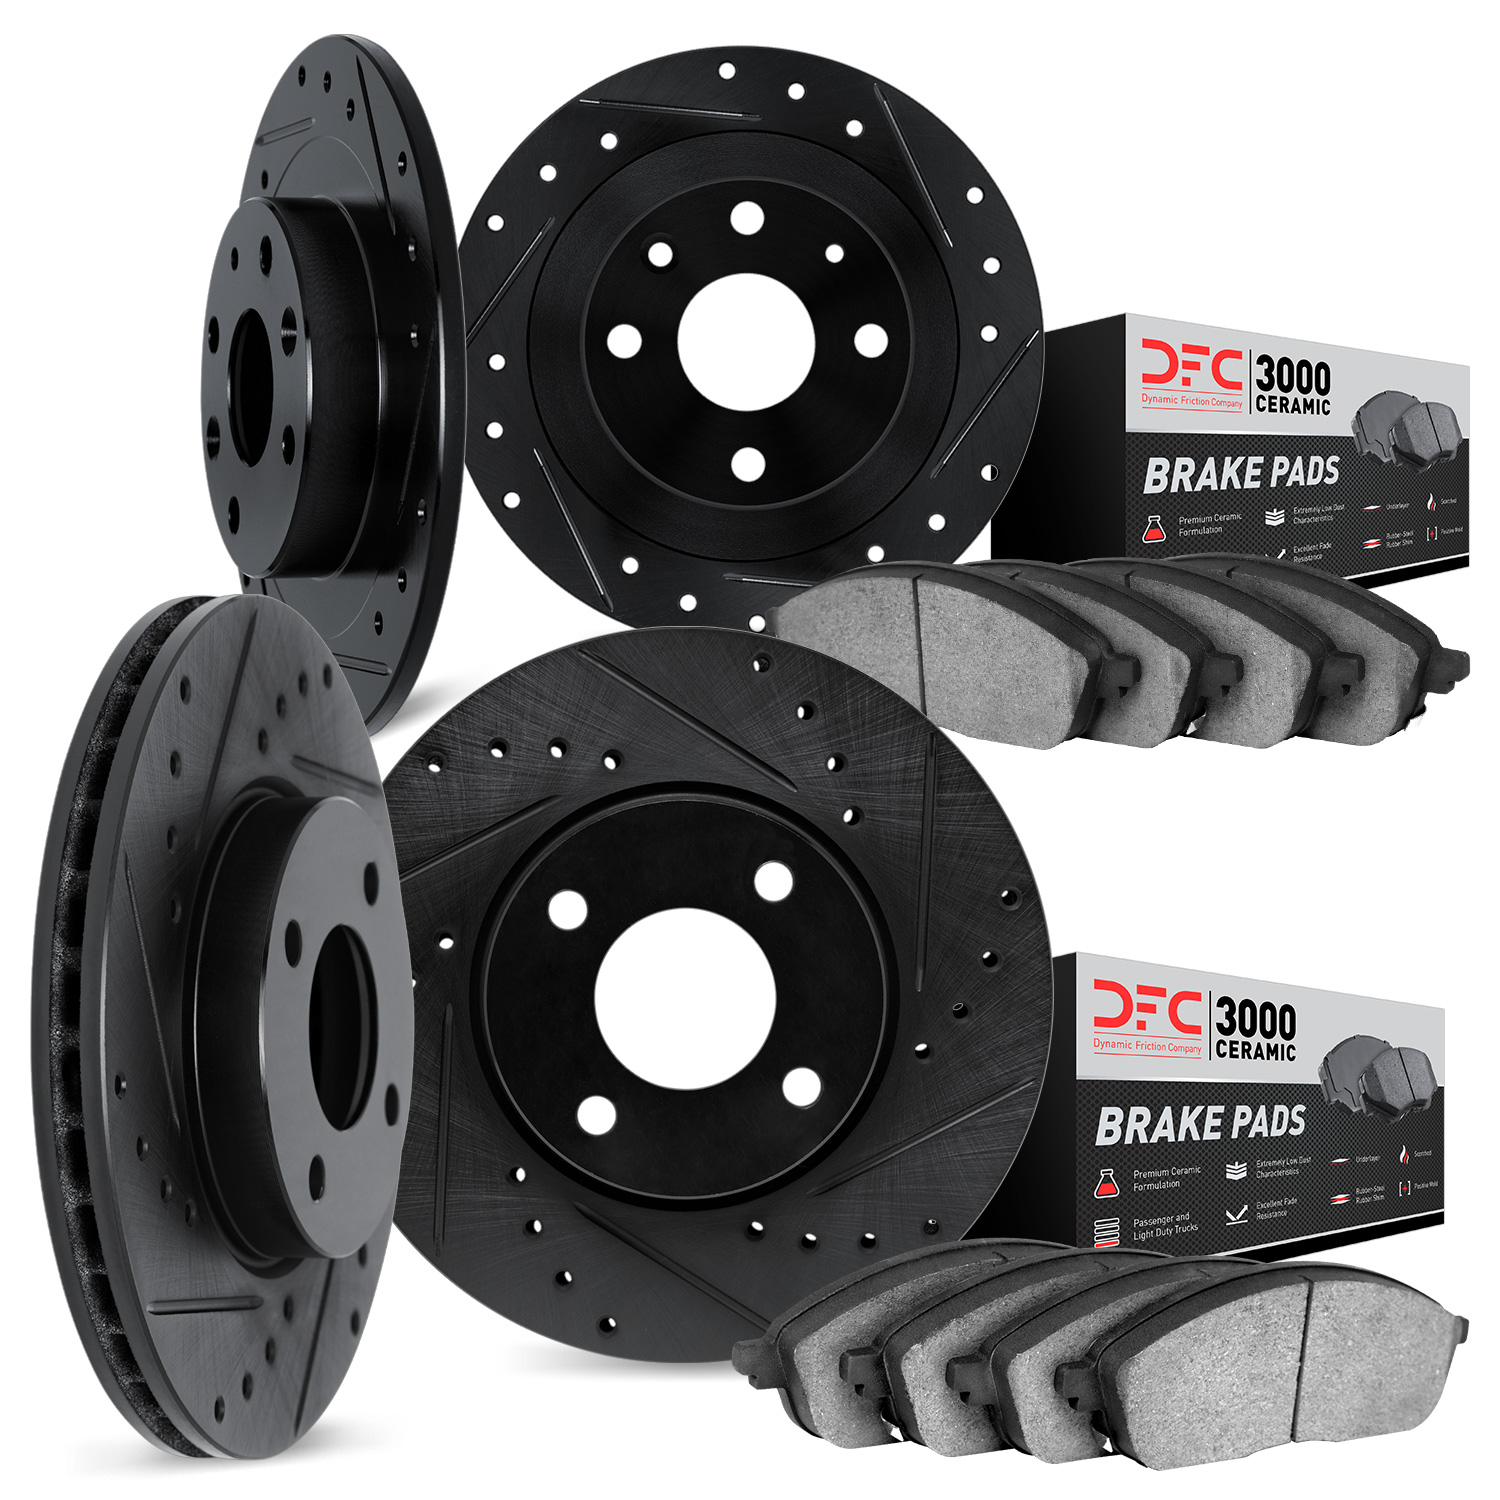 8304-07002 Drilled/Slotted Brake Rotors with 3000-Series Ceramic Brake Pads Kit [Black], 2012-2019 Mopar, Position: Front and Re